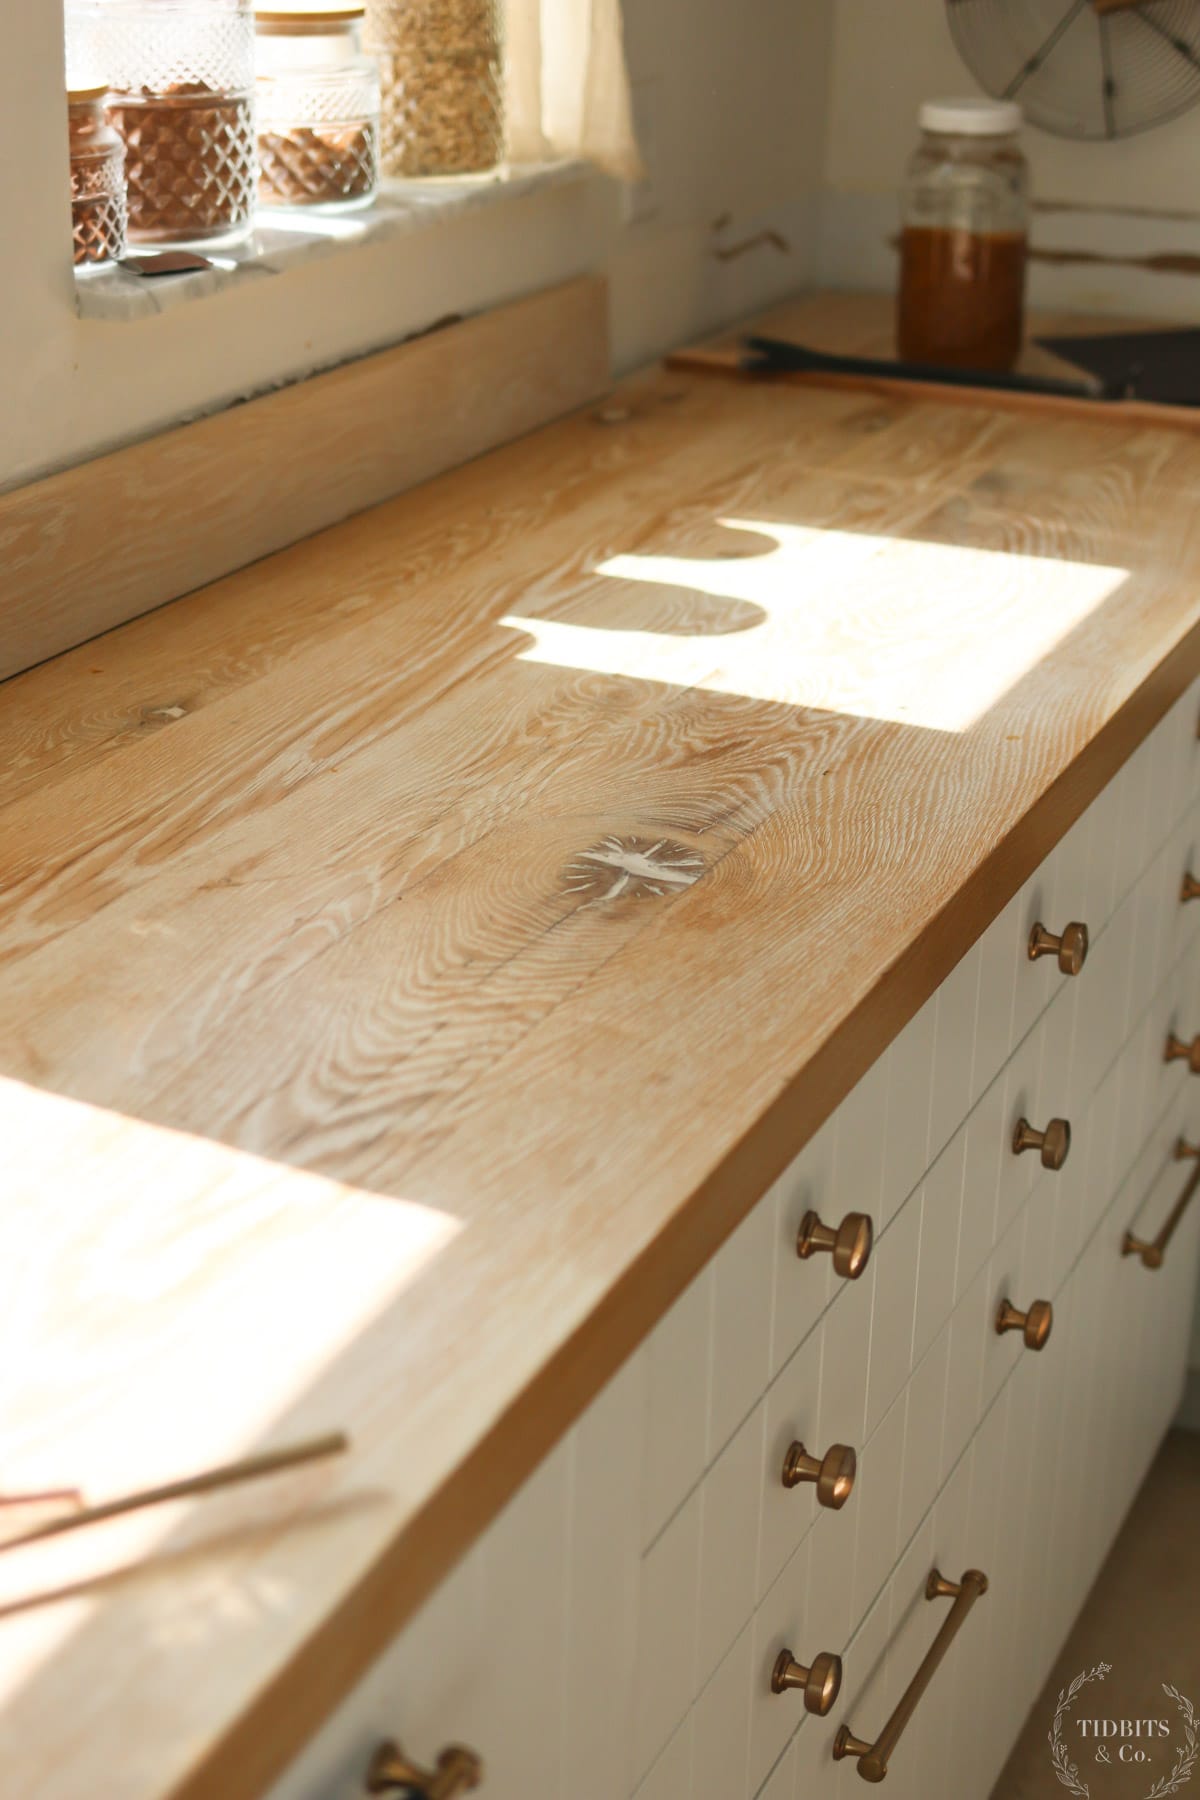 A wood countertop showing yellowing stain